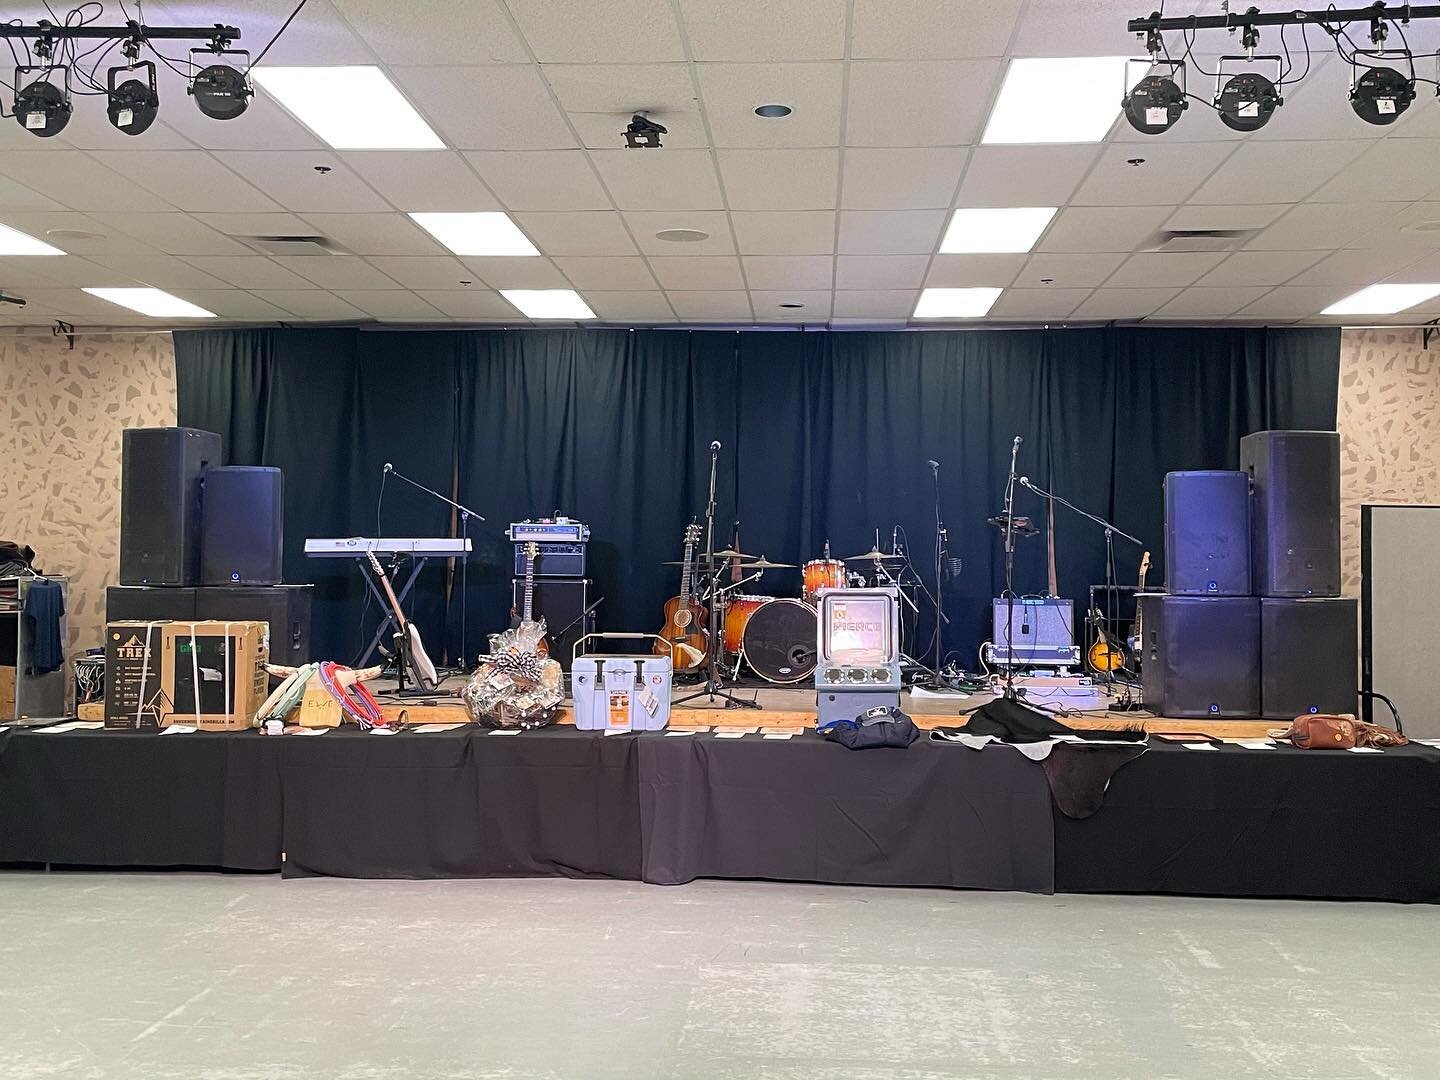 Been a long 2 1/2 months off writing and getting geared up for a new album.  But we&rsquo;re back on the road performing tonight in Torrington Wy at the Black Jeans and Gold Buckles Gala for Eastern Wyoming College Rodeo Team! #livemusic #touring #ro